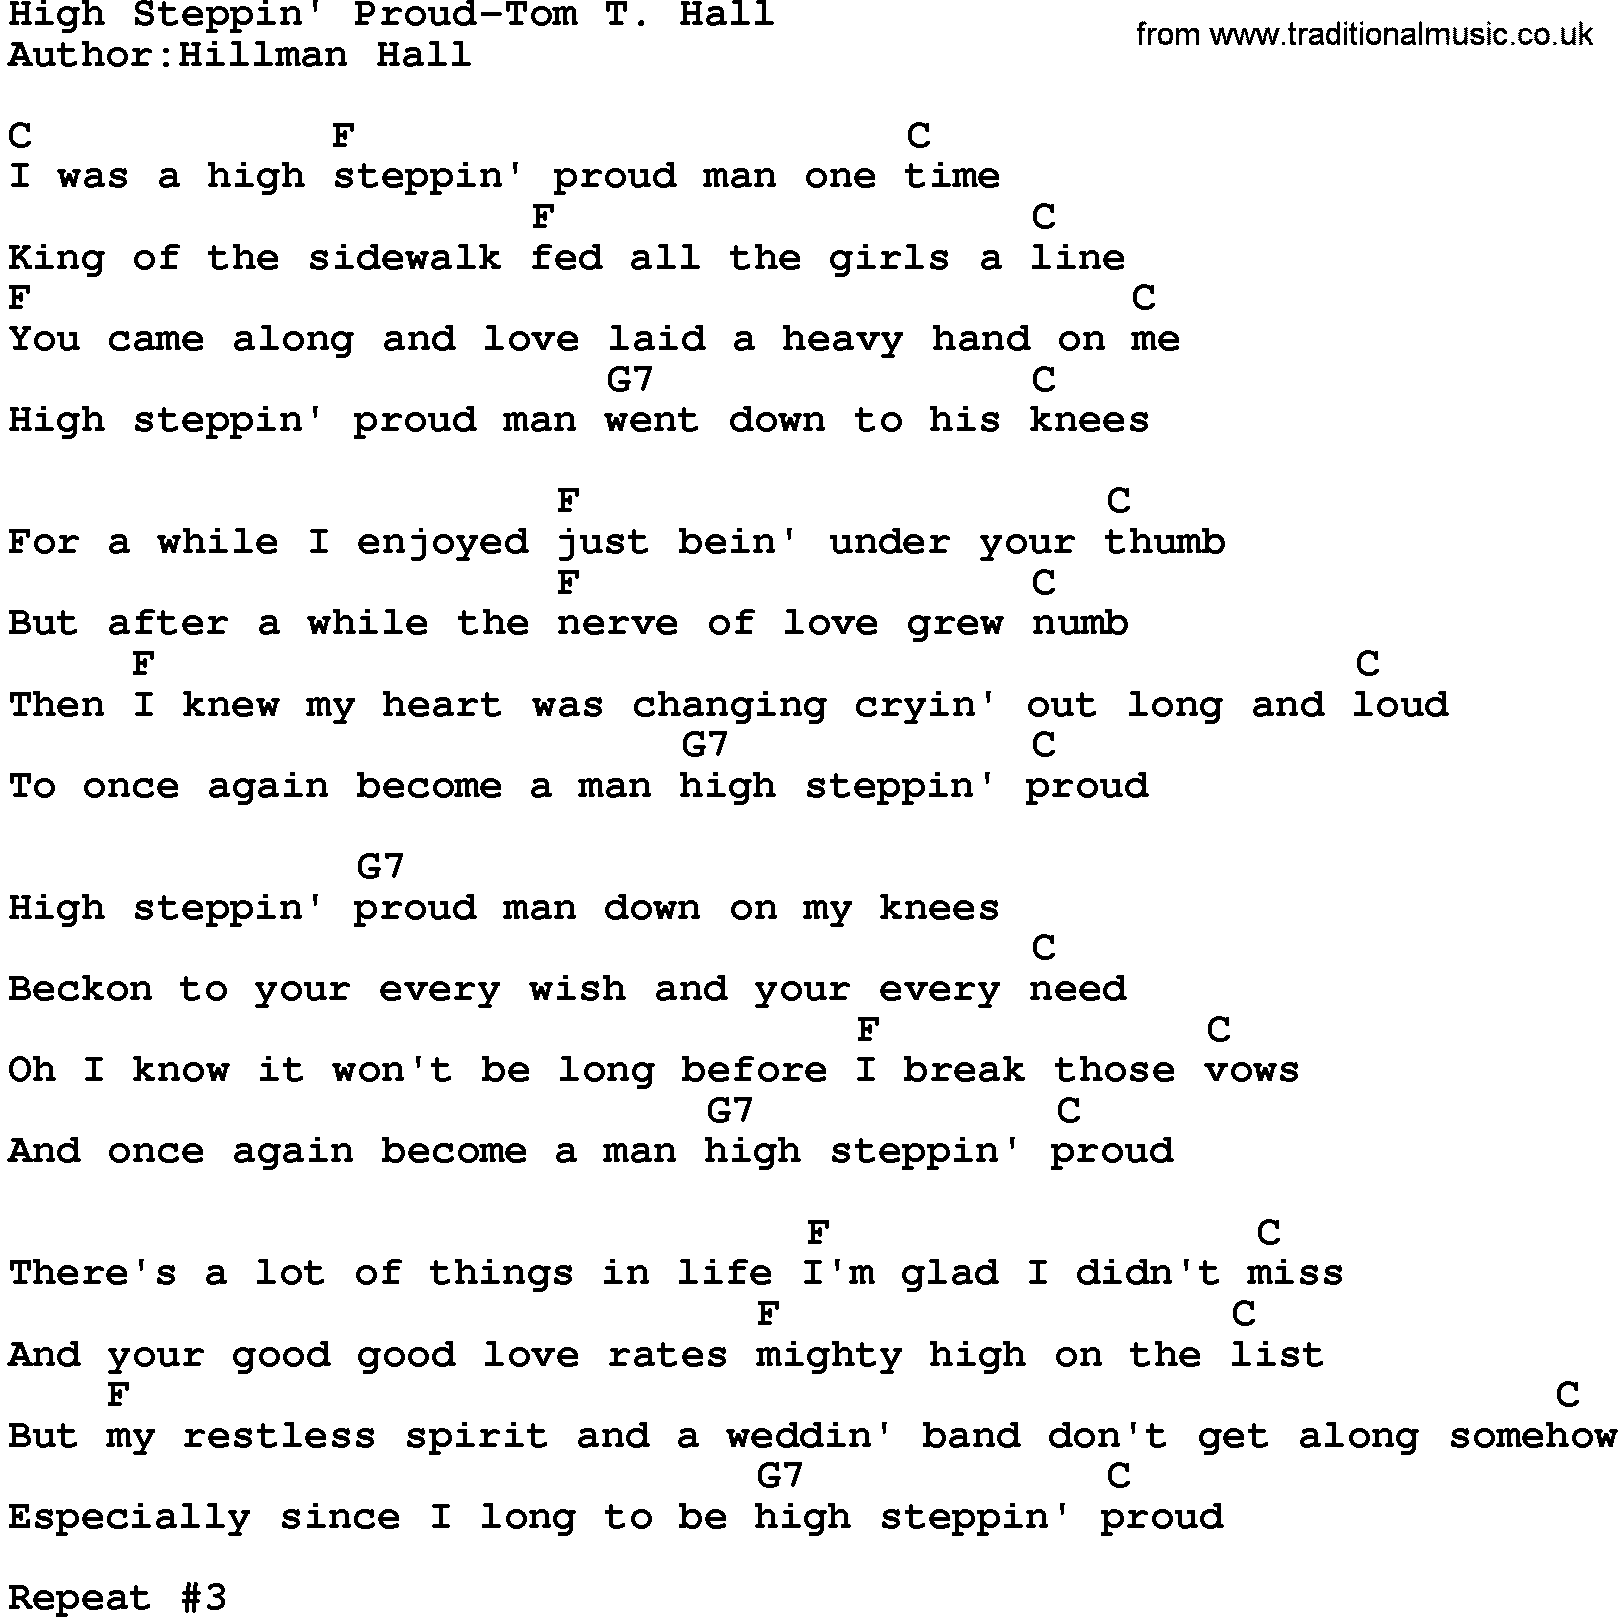 Country music song: High Steppin' Proud-Tom T Hall lyrics and chords